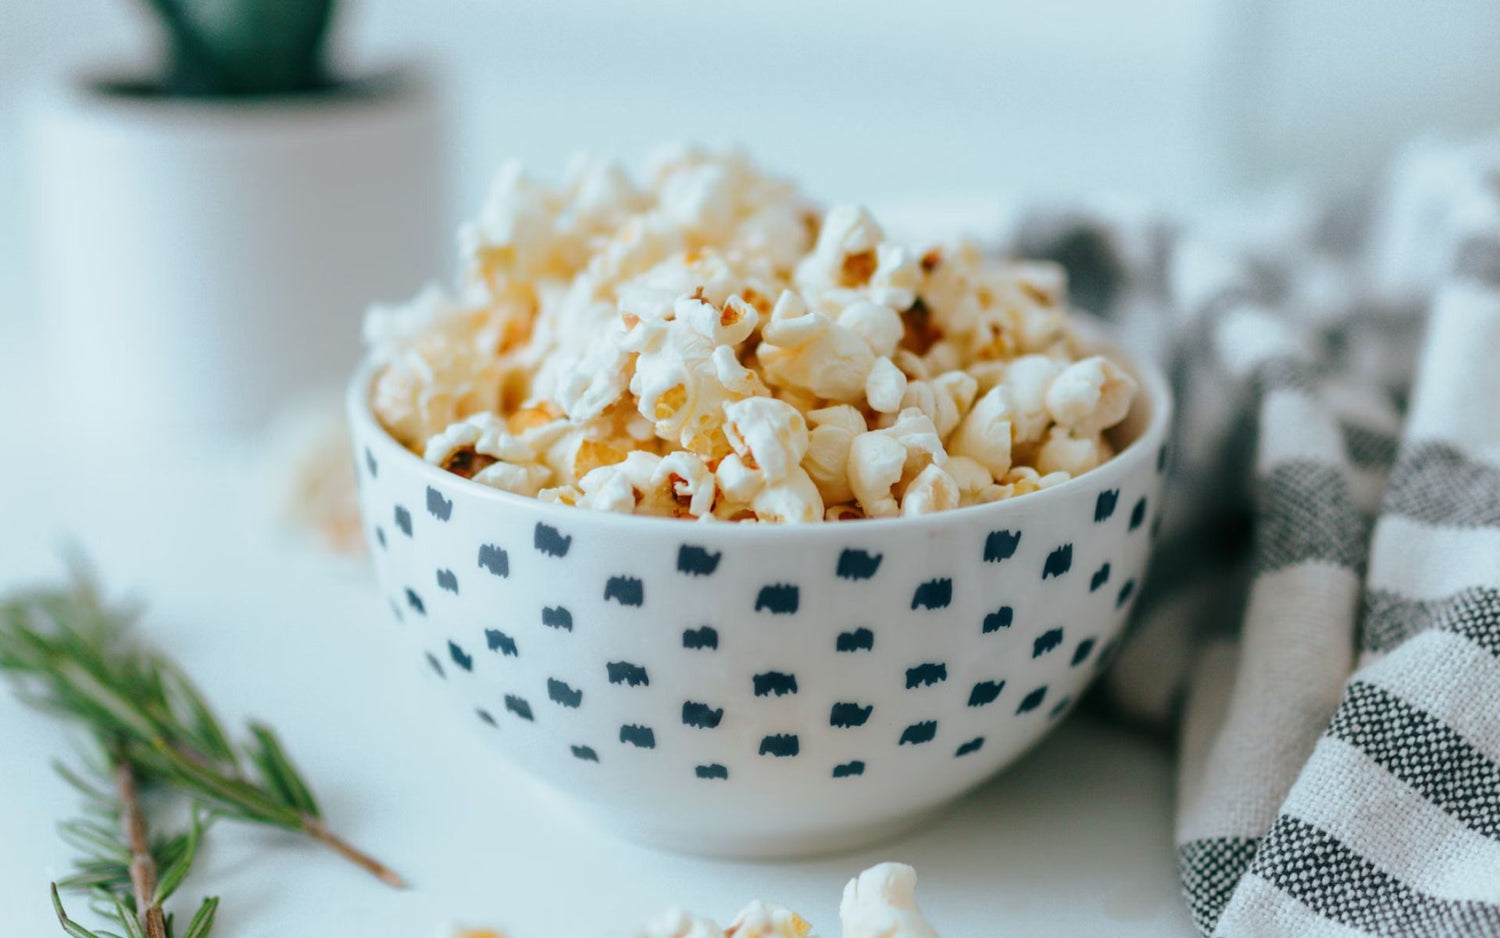 Fox nuts vs Popcorn – which is better?